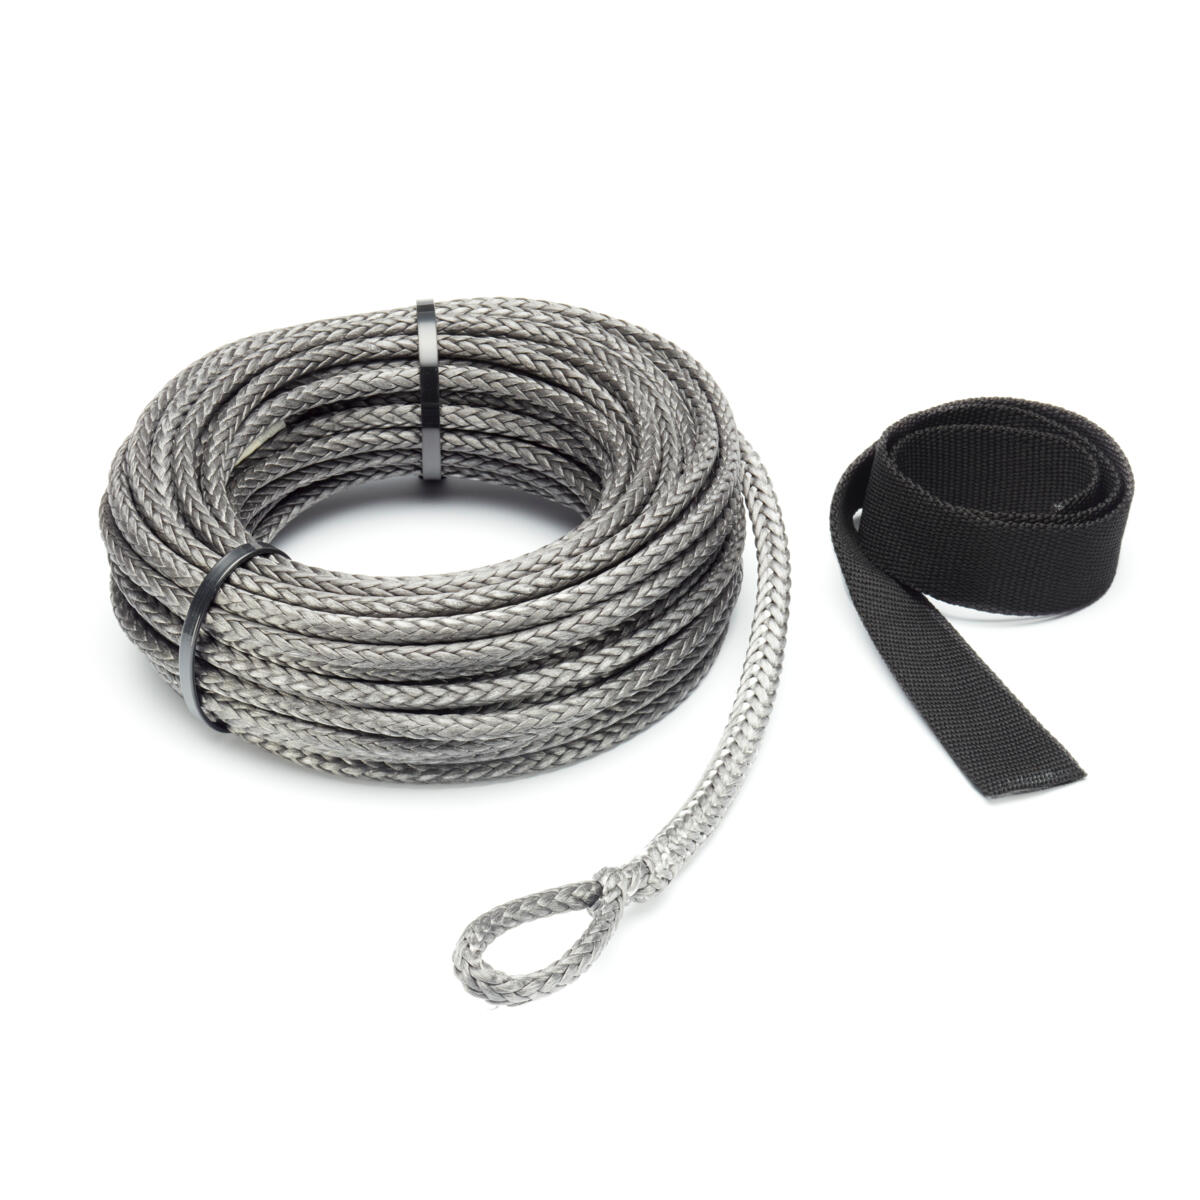 Replacement synthetic rope for your optional WARN® winch.